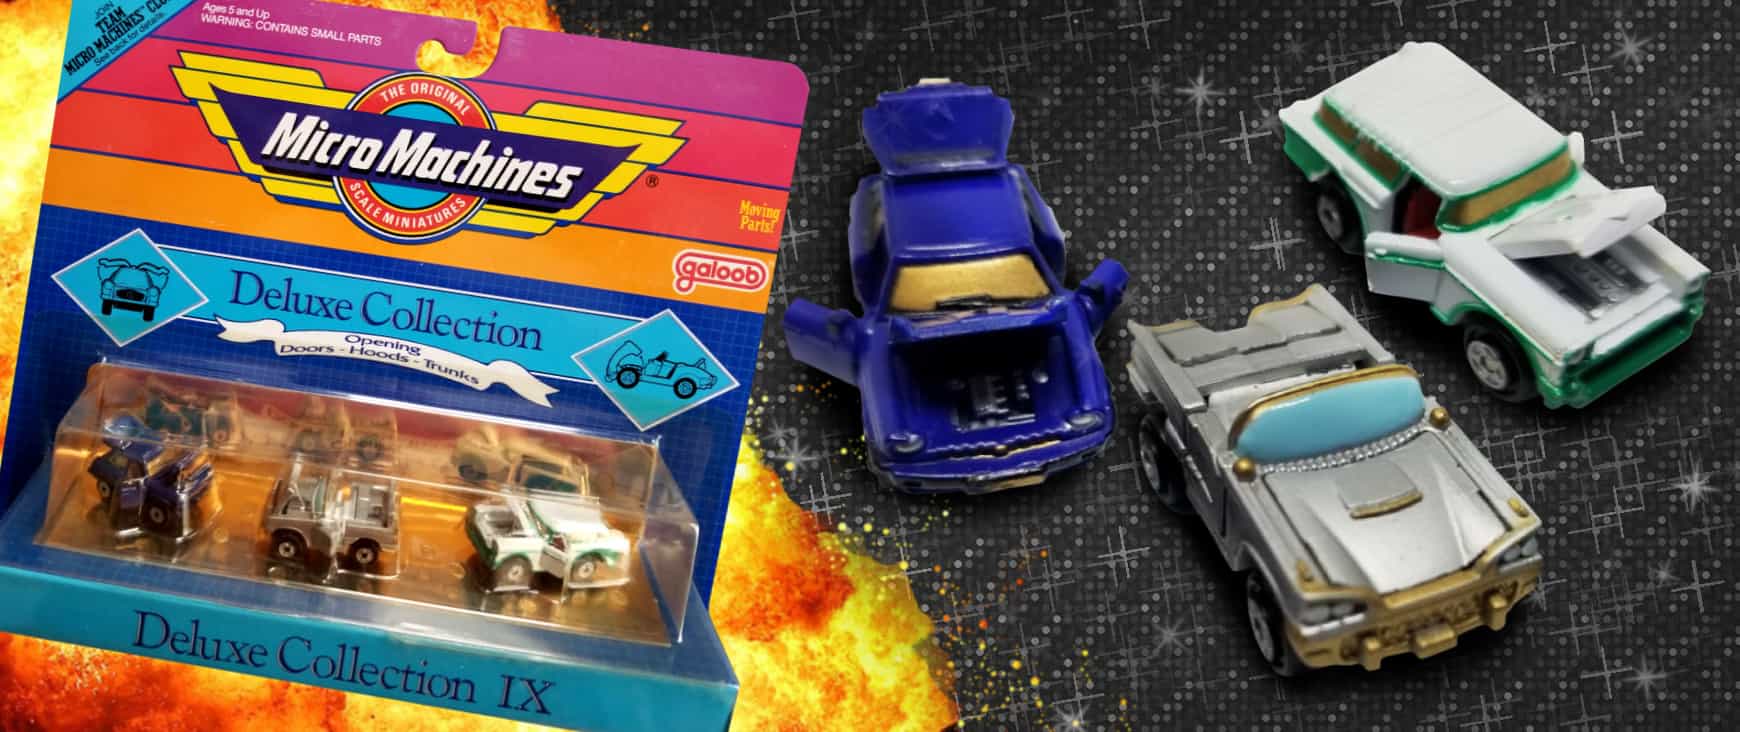 Micro Machines Deluxe Collection IX released 1990